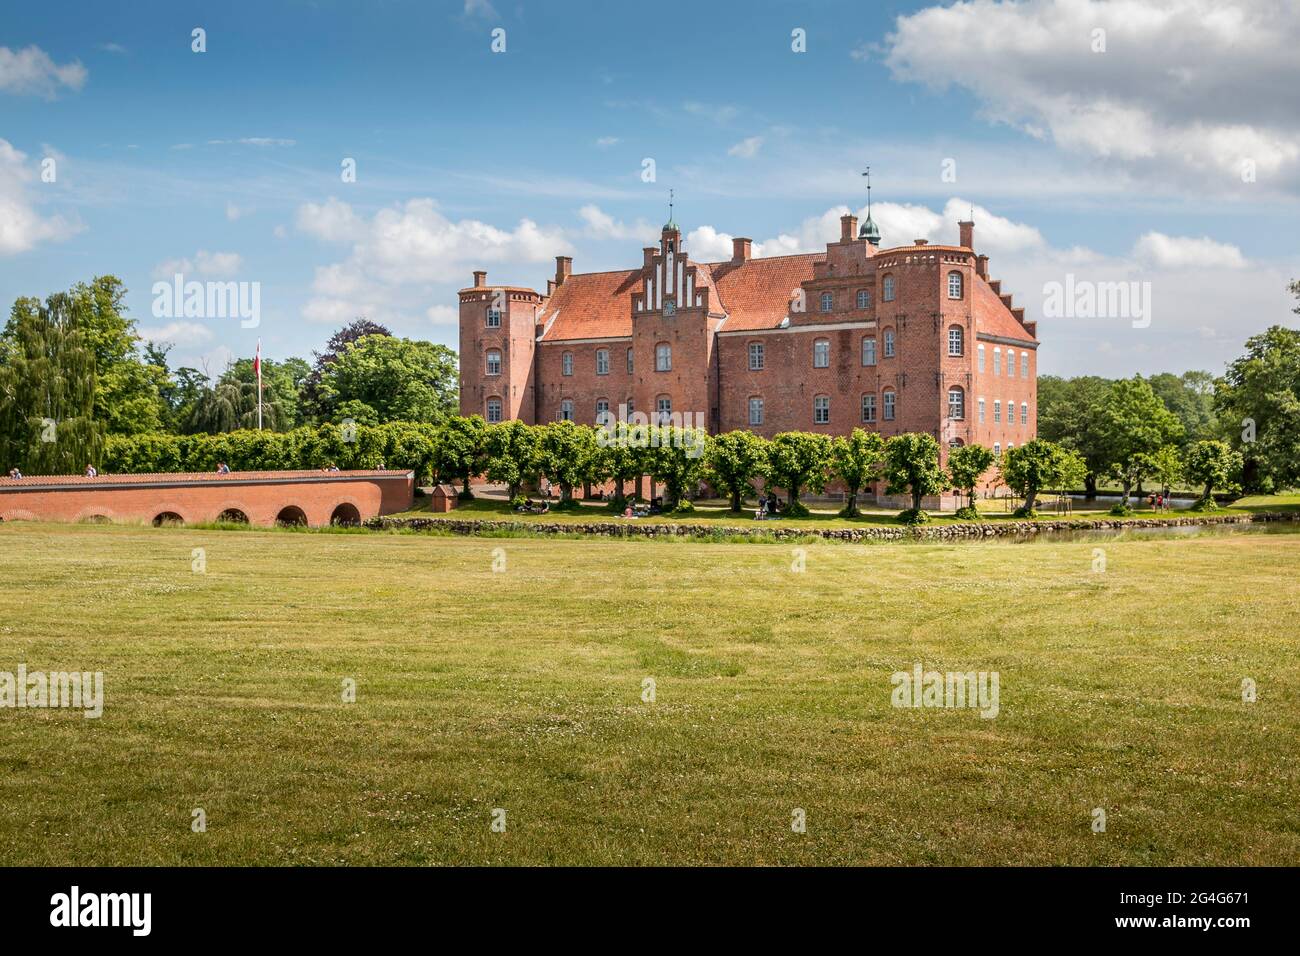 Auning, - 19 June 2021: Gammel Estrup Castle from the 14th century, The castle is surrounded by nature, trees and lakes and moat Stock Photo - Alamy